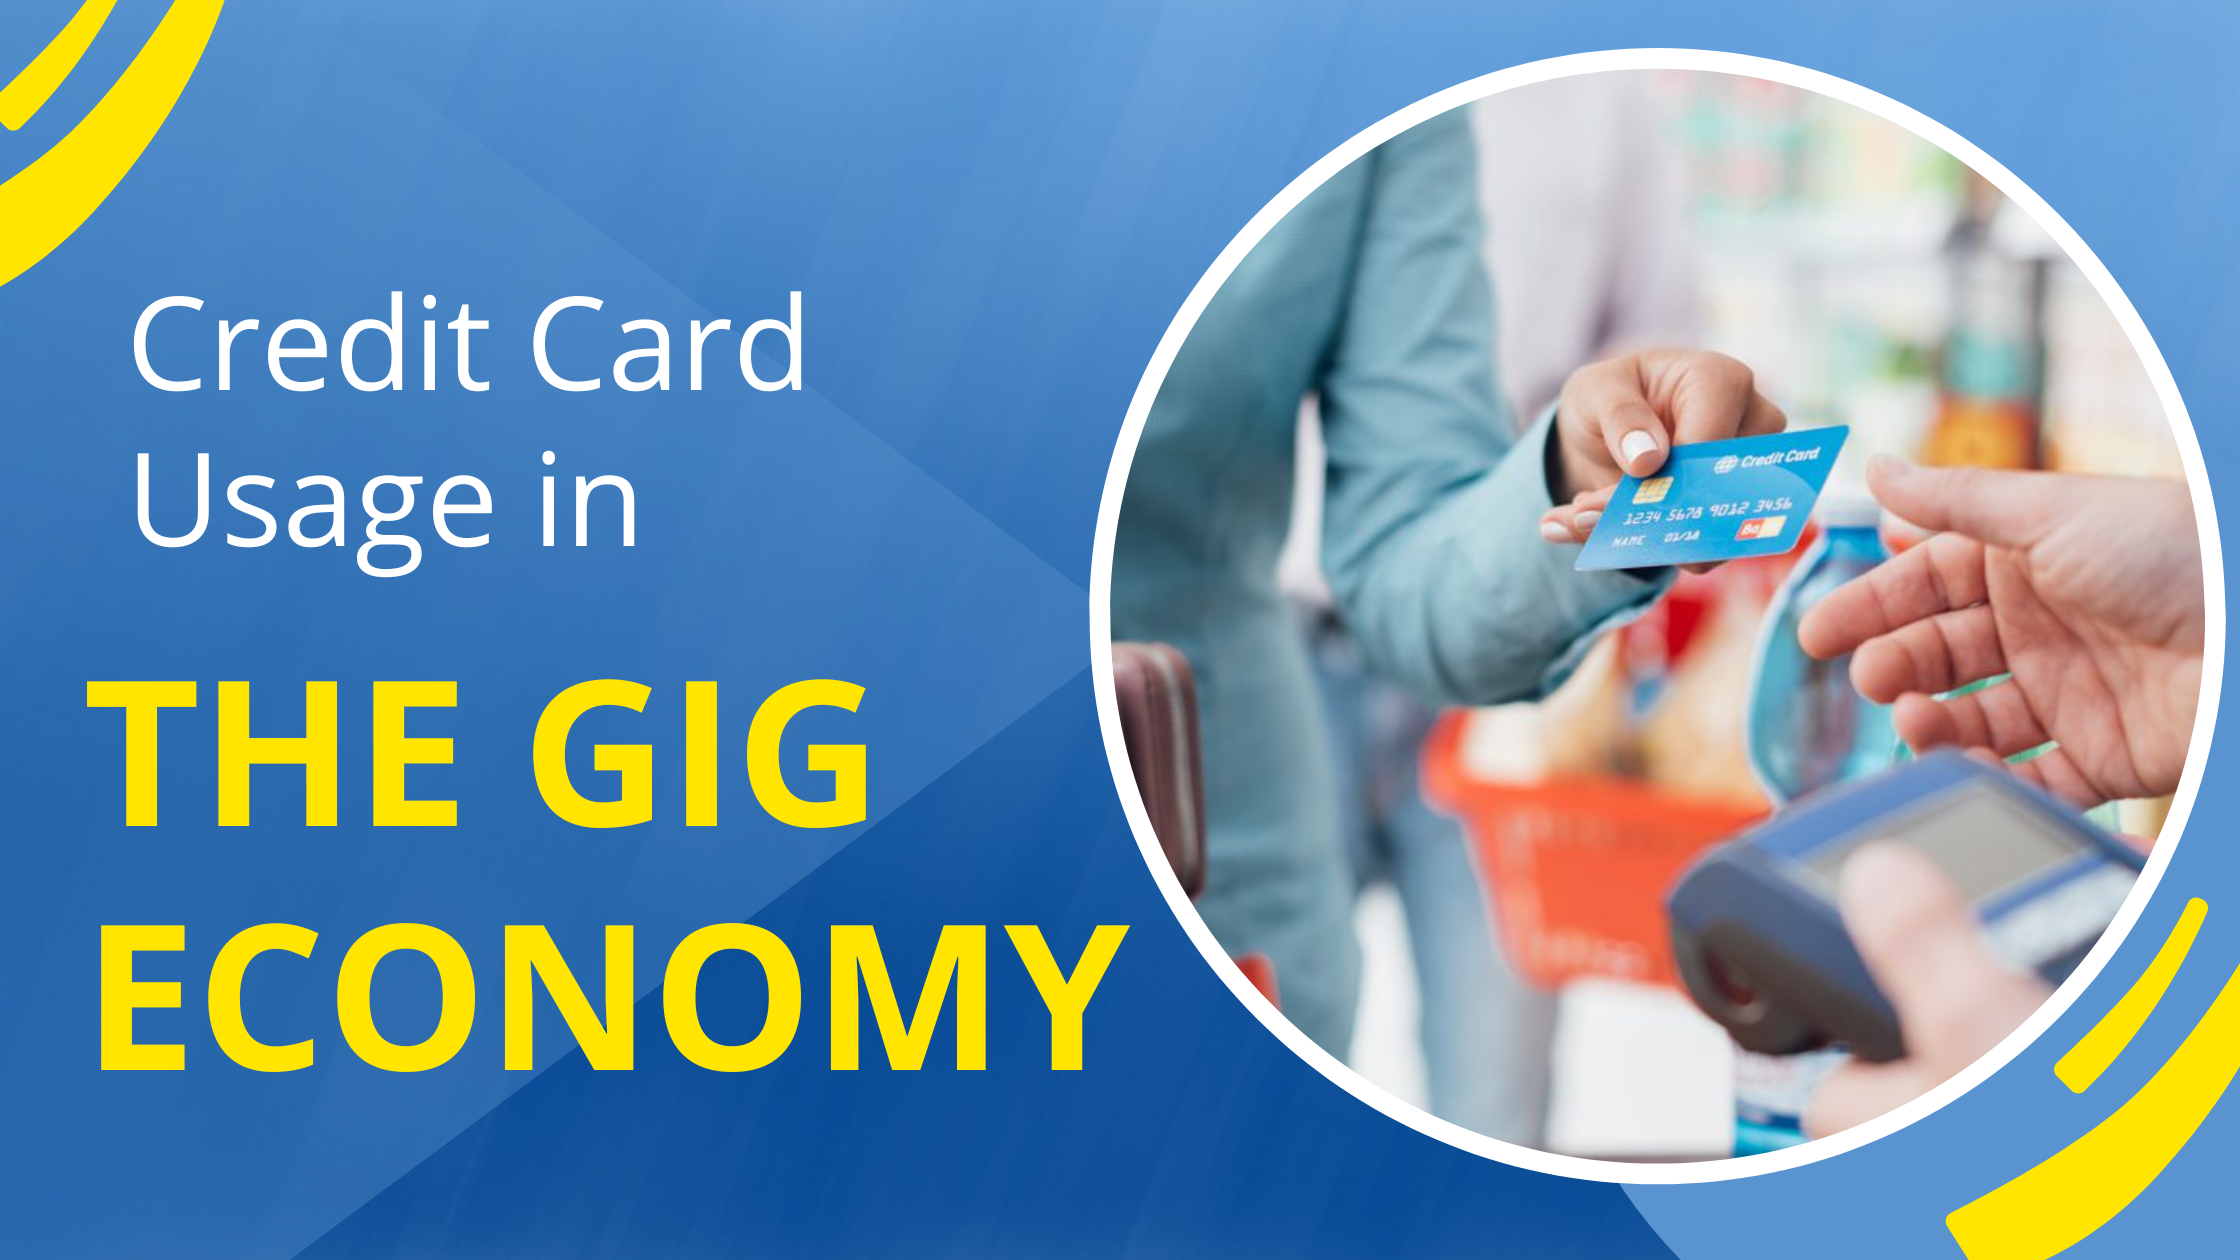 Credit Card Usage in the Gig Economy